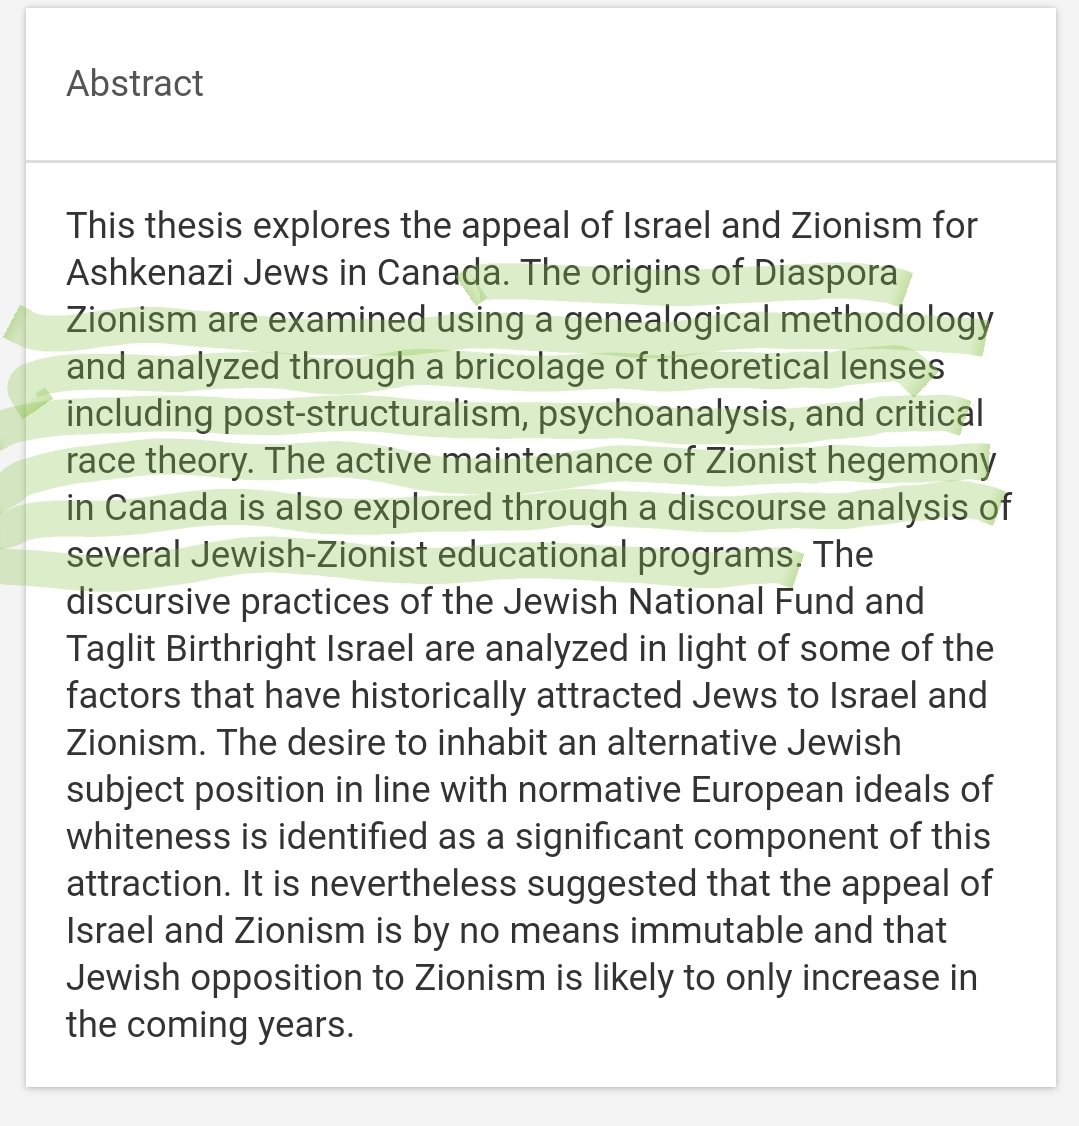 8/Here's a paper using post-structuralism (a postmodern theory) and Critical Race Theory to examine hegemony (cultural dominance and power) and concludes there is a Zionest (Jewish) hegemony in....Canada.It literally argues "The Jews Run Canada." It's pure anti-semitism.